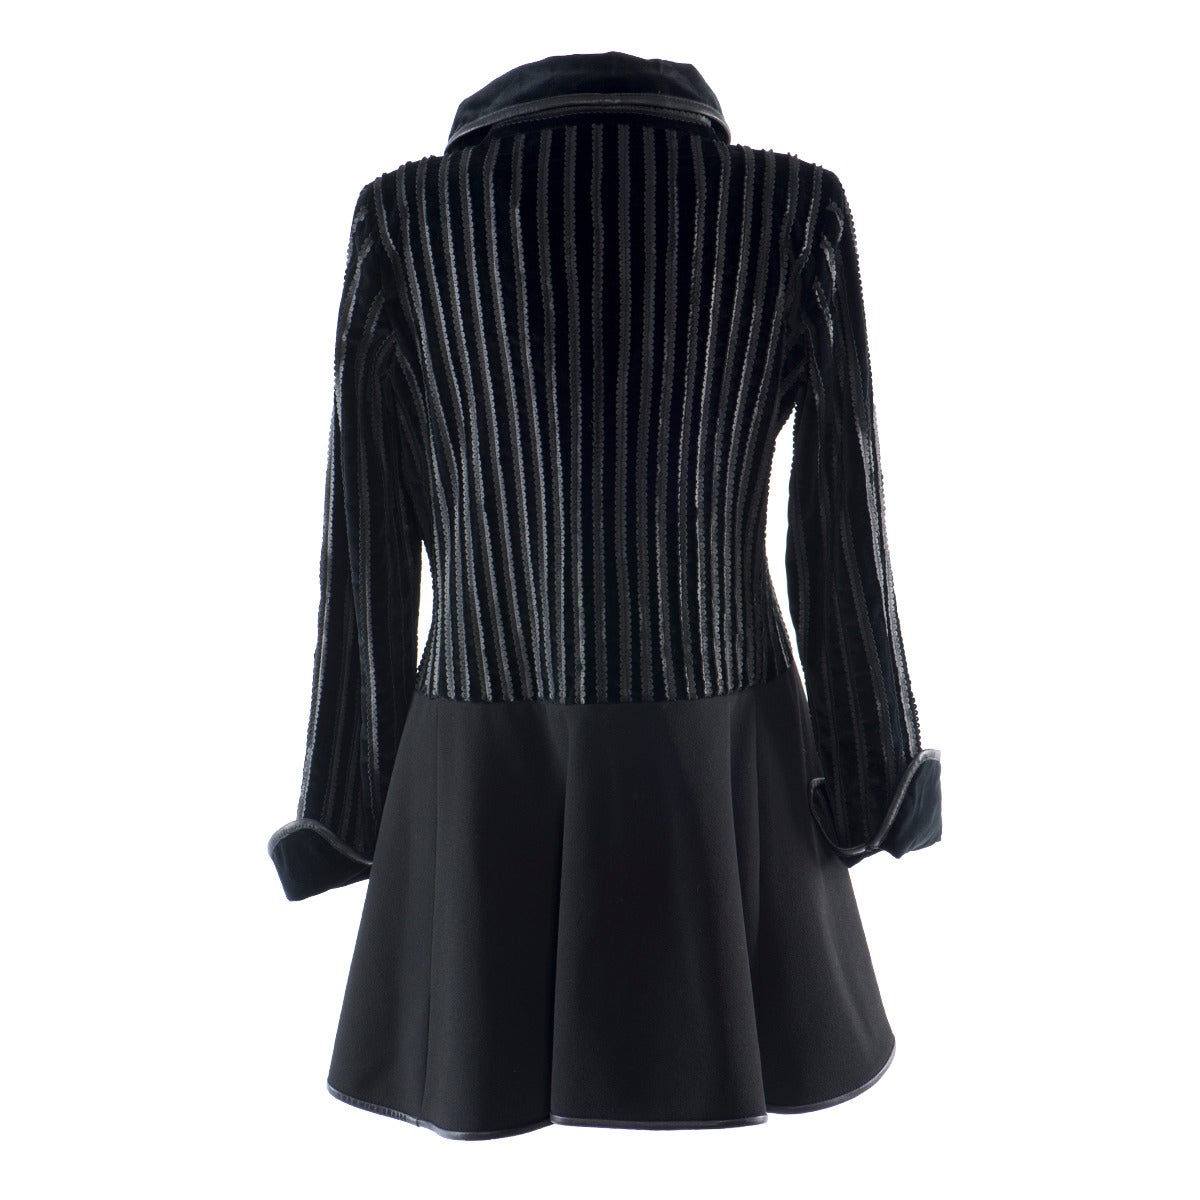 Wonderful jacket by Emporio Armani
Black color
The jacket is in cotton, completelt worked with stripes of leather
Fantastic cut, in Giorgio Armani style
Long jacket, caban style
New with tag
Free express shipping included in the price